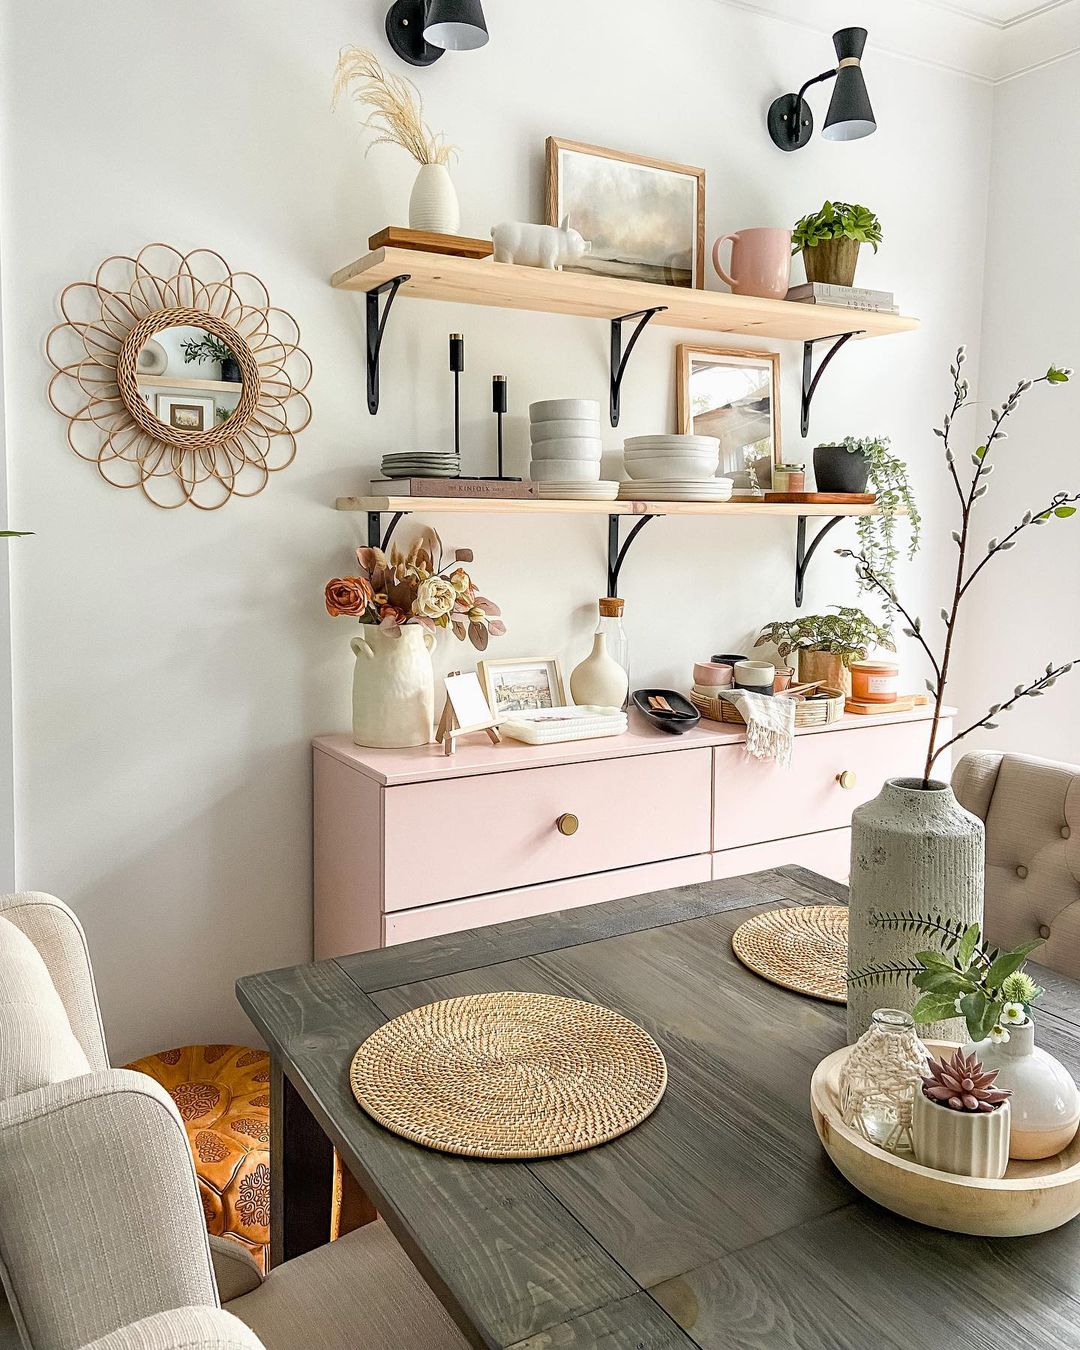 Soft Neutrals with Whimsical Accents